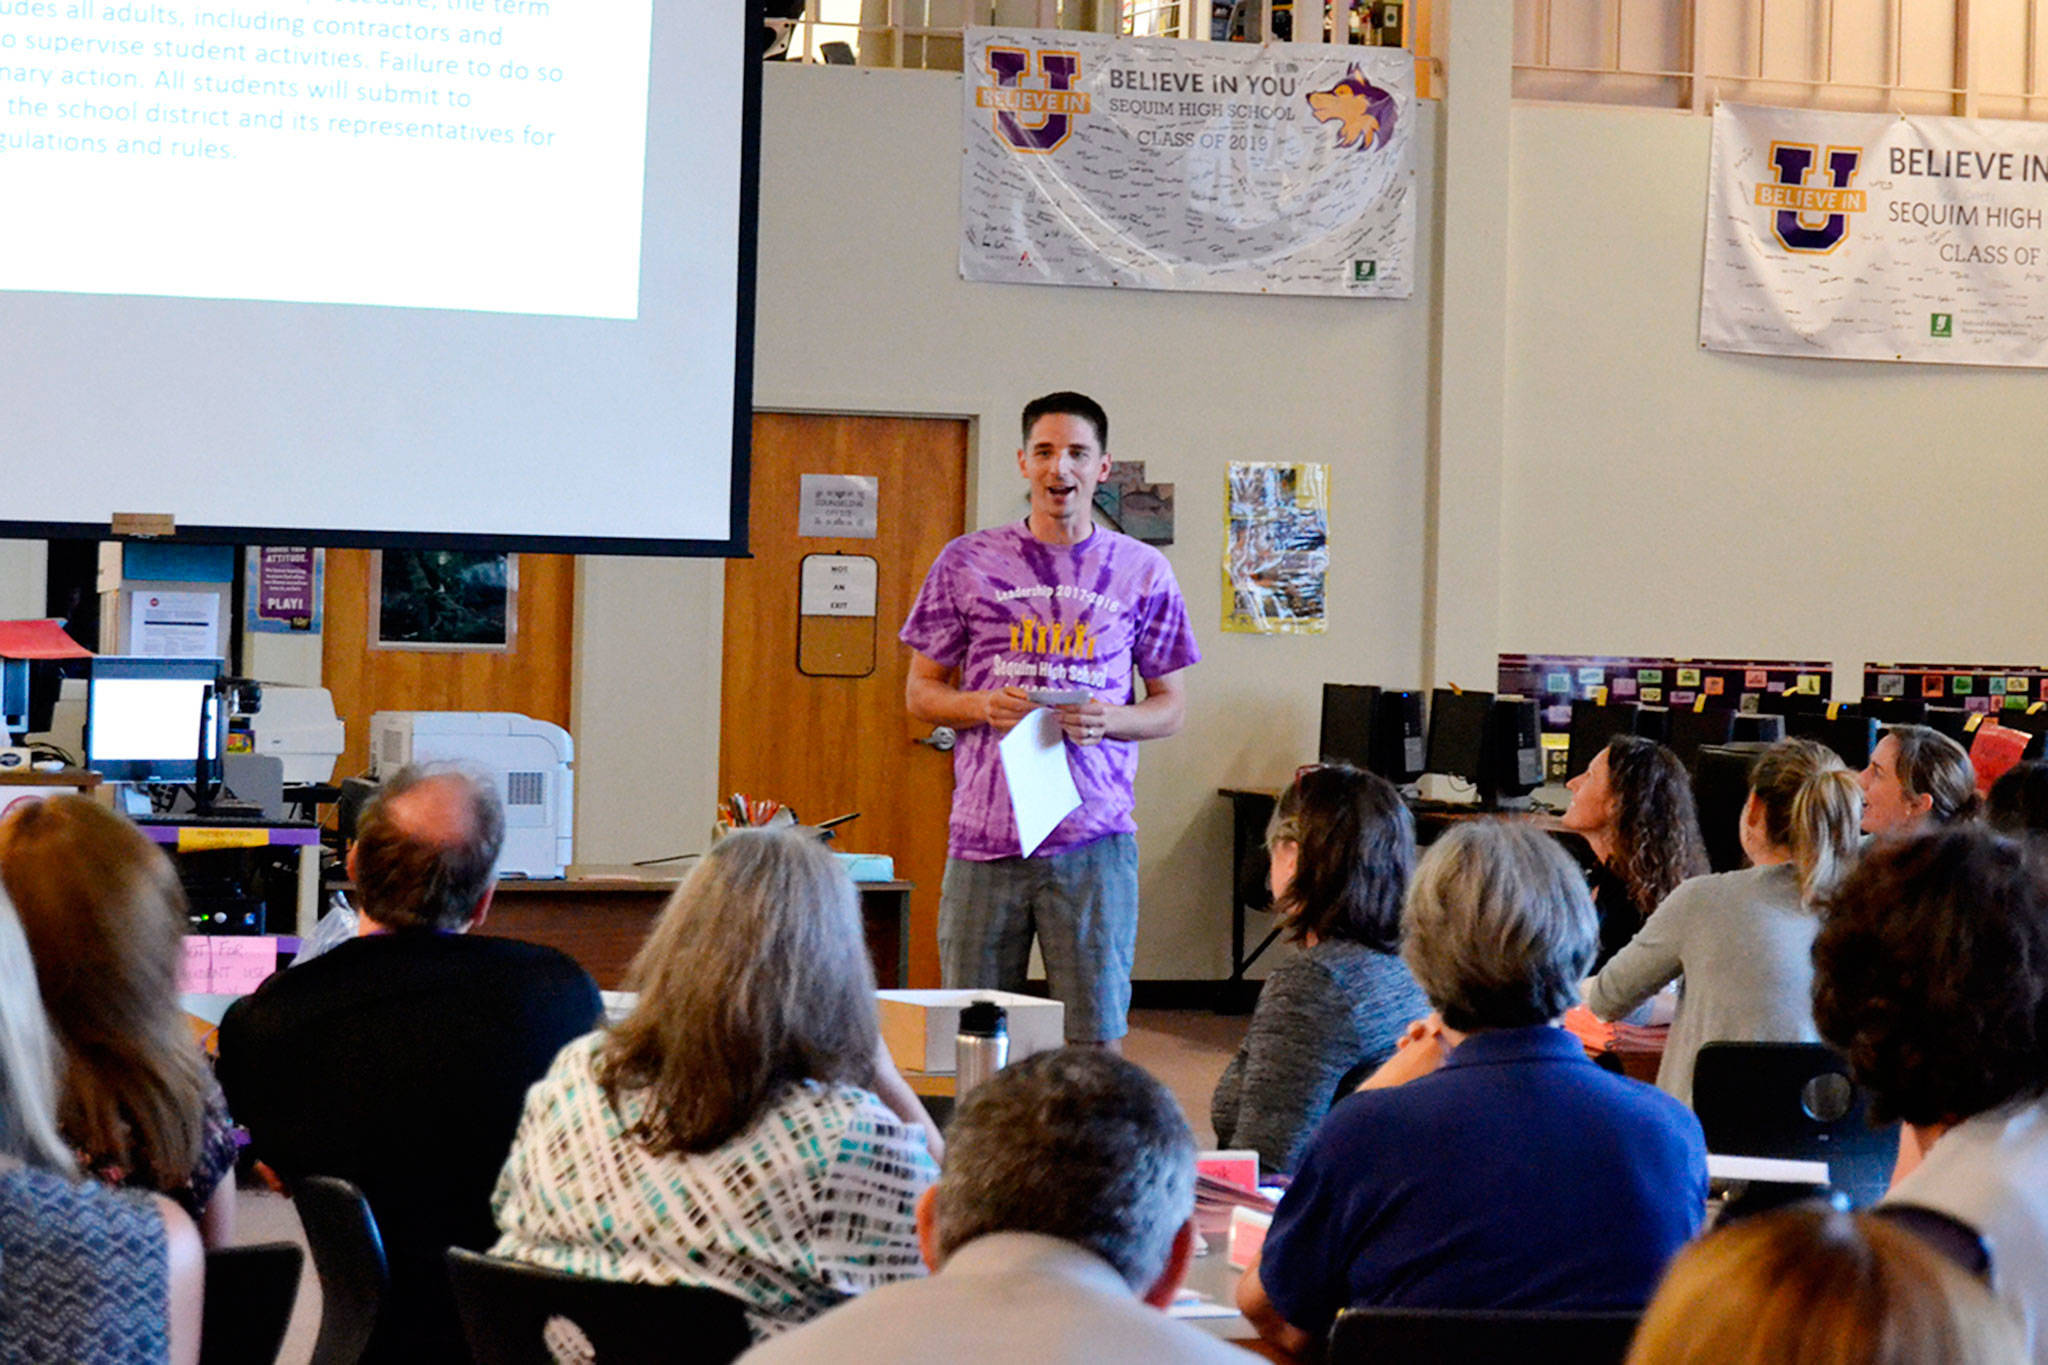 Teacher Sean O’Mera answers co-workers’ questions about scheduling the bulletin this year at Sequim High School on Tuesday, a day before school started districtwide. (Matthew Nash/Olympic Peninsula News Group)